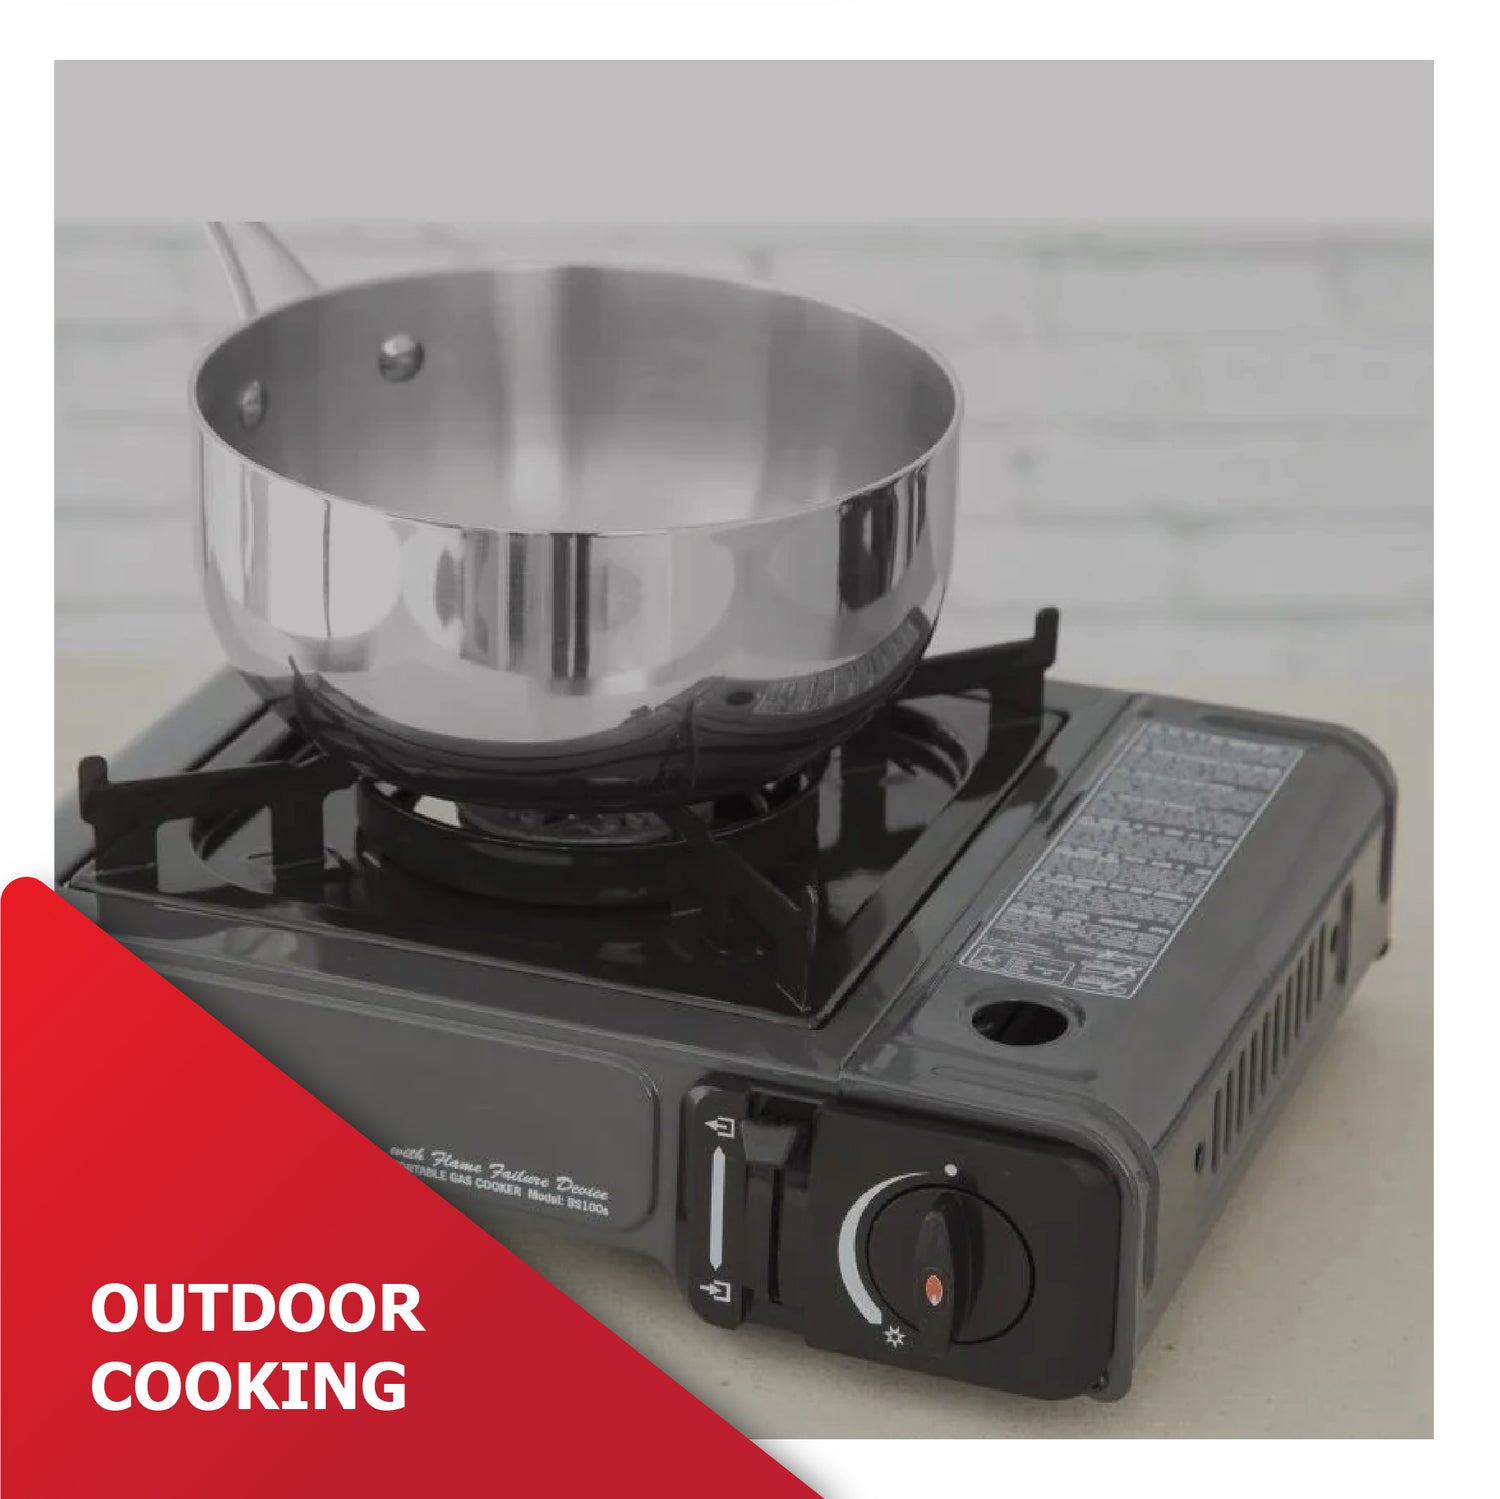 Outdoor Cooking | Category